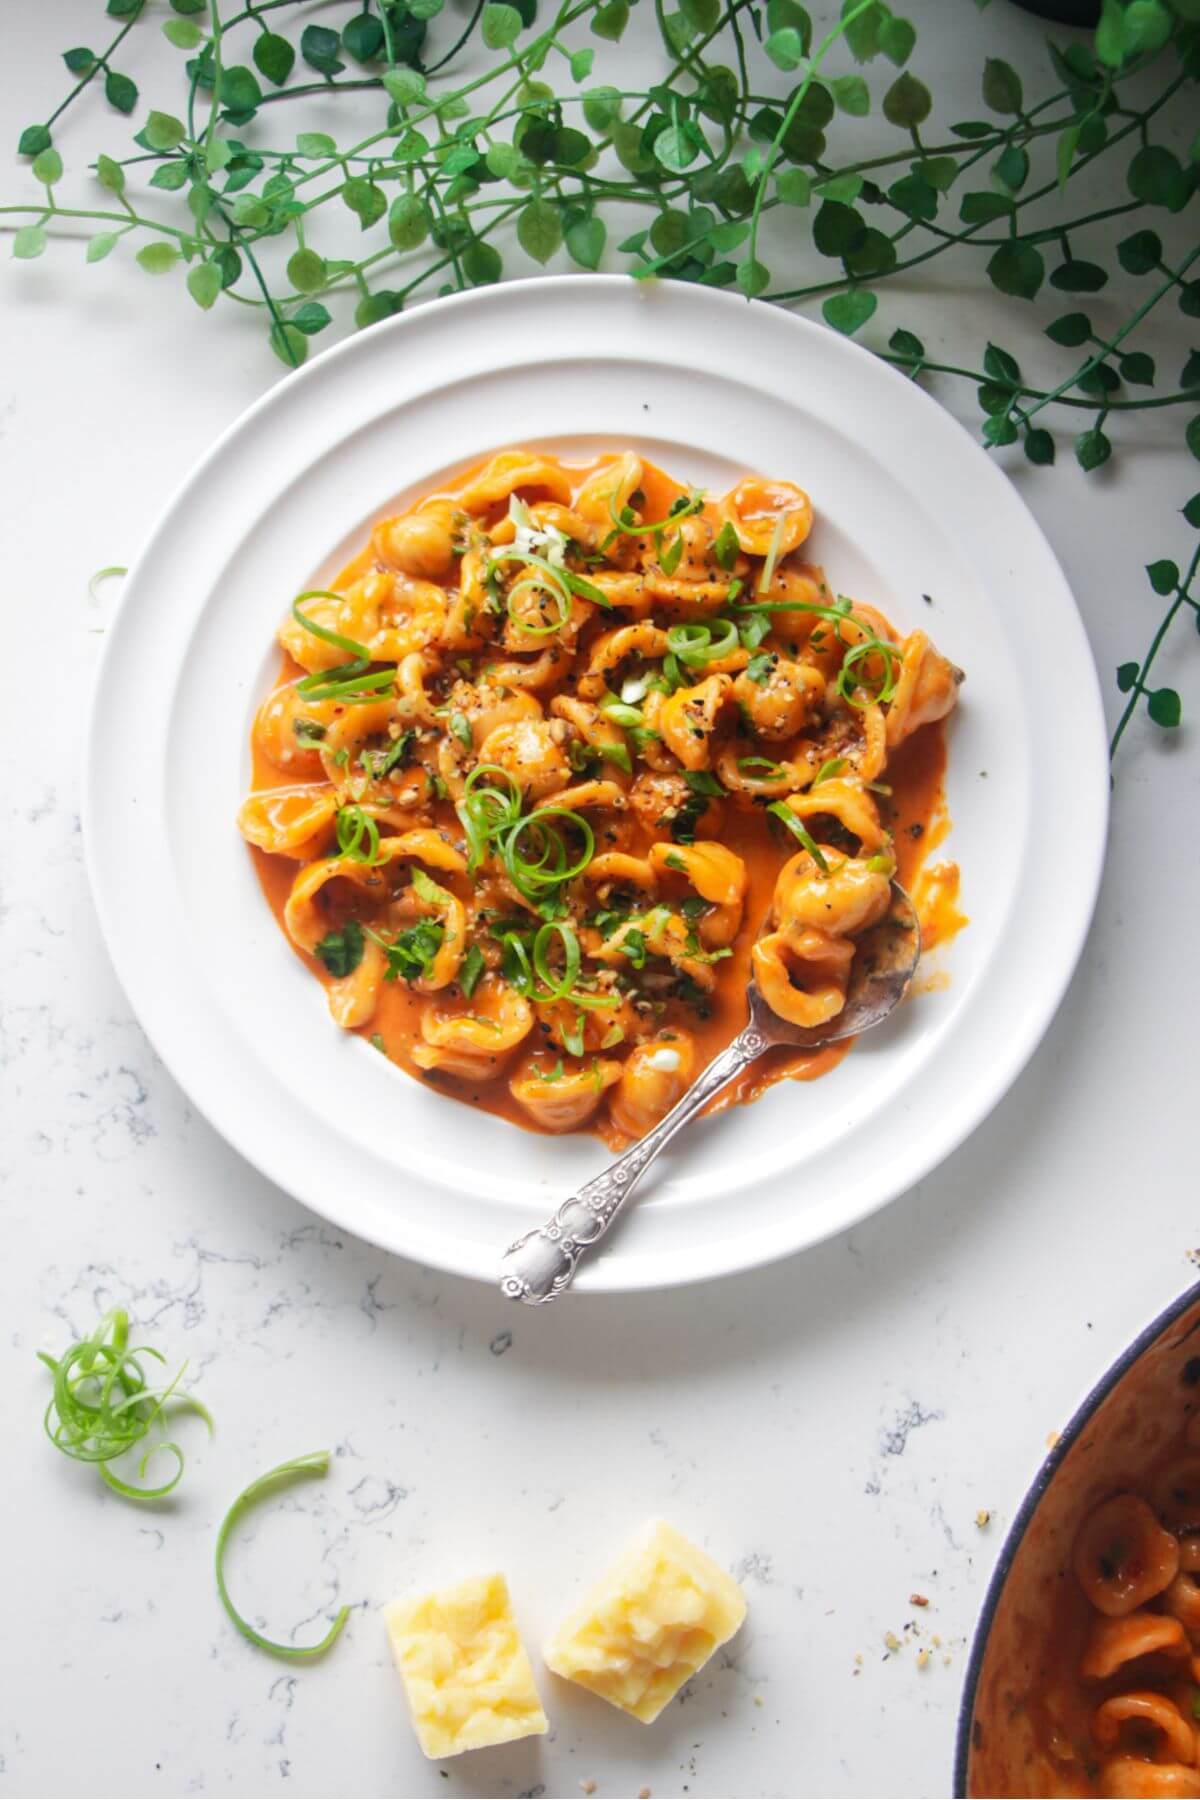 Creamy gochujang pasta topped with green spring onions and coriander, on a white plate.